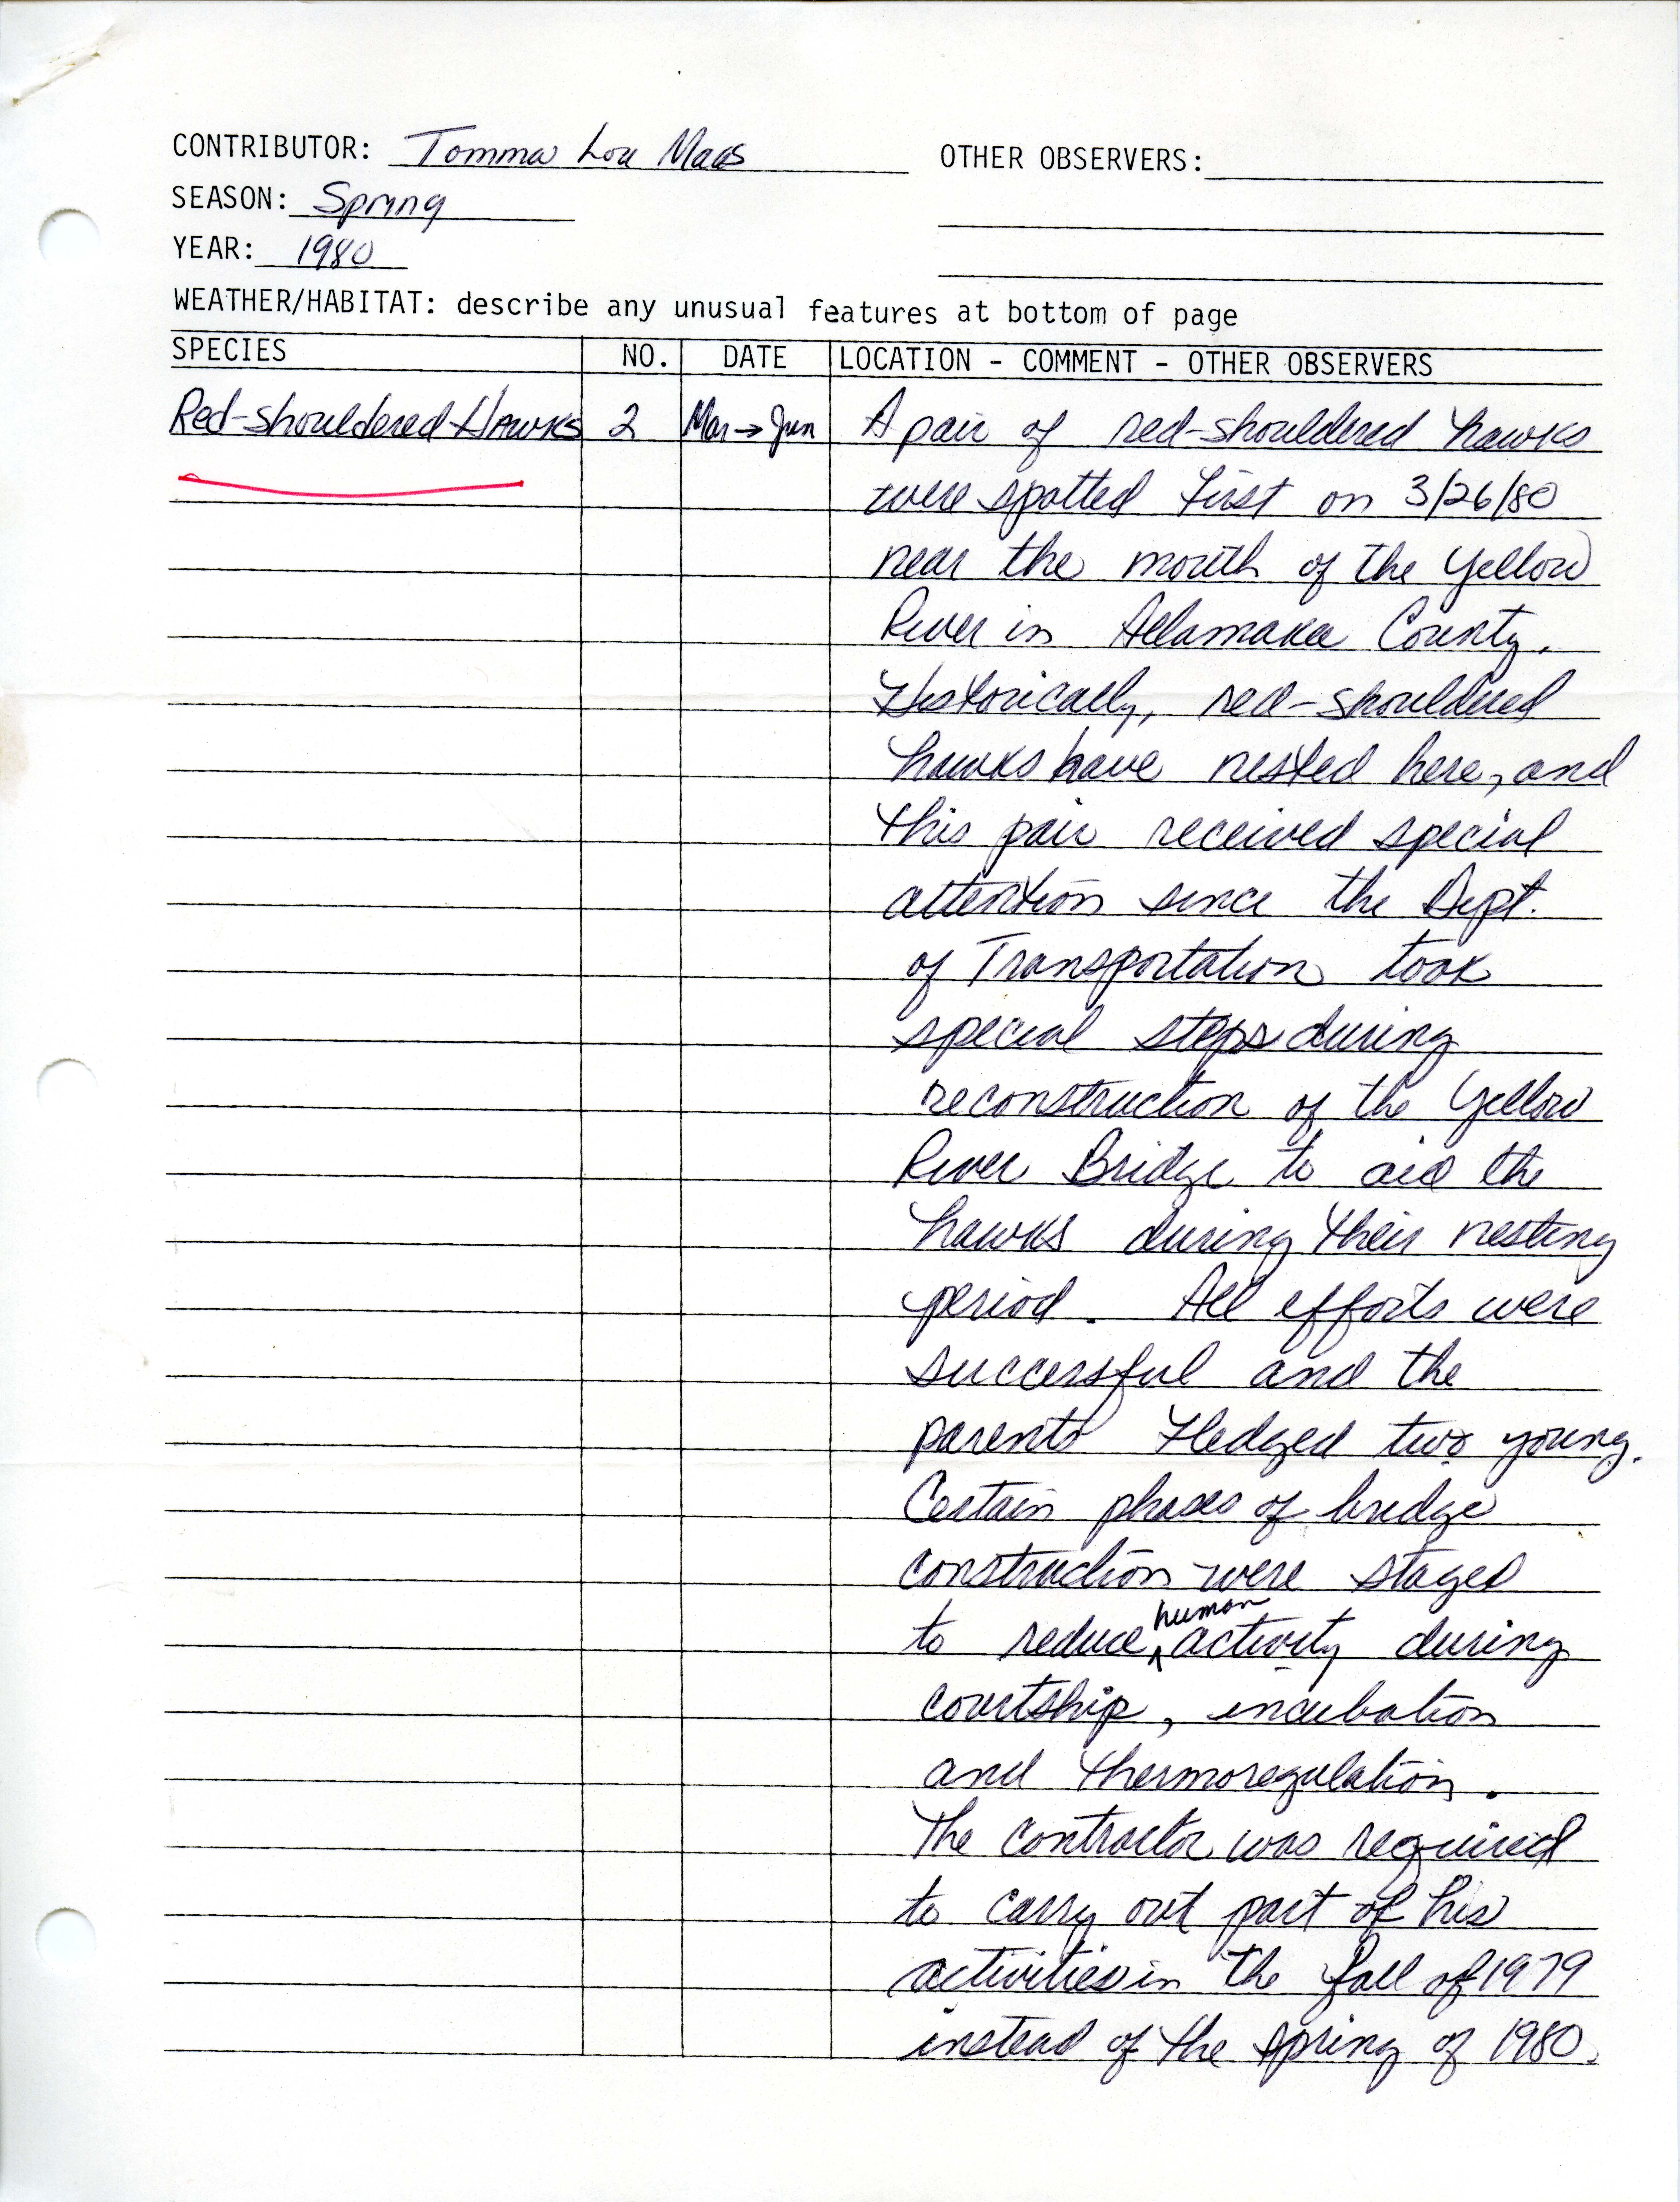 Field notes contributed by Tomma Lou Maas, spring 1980